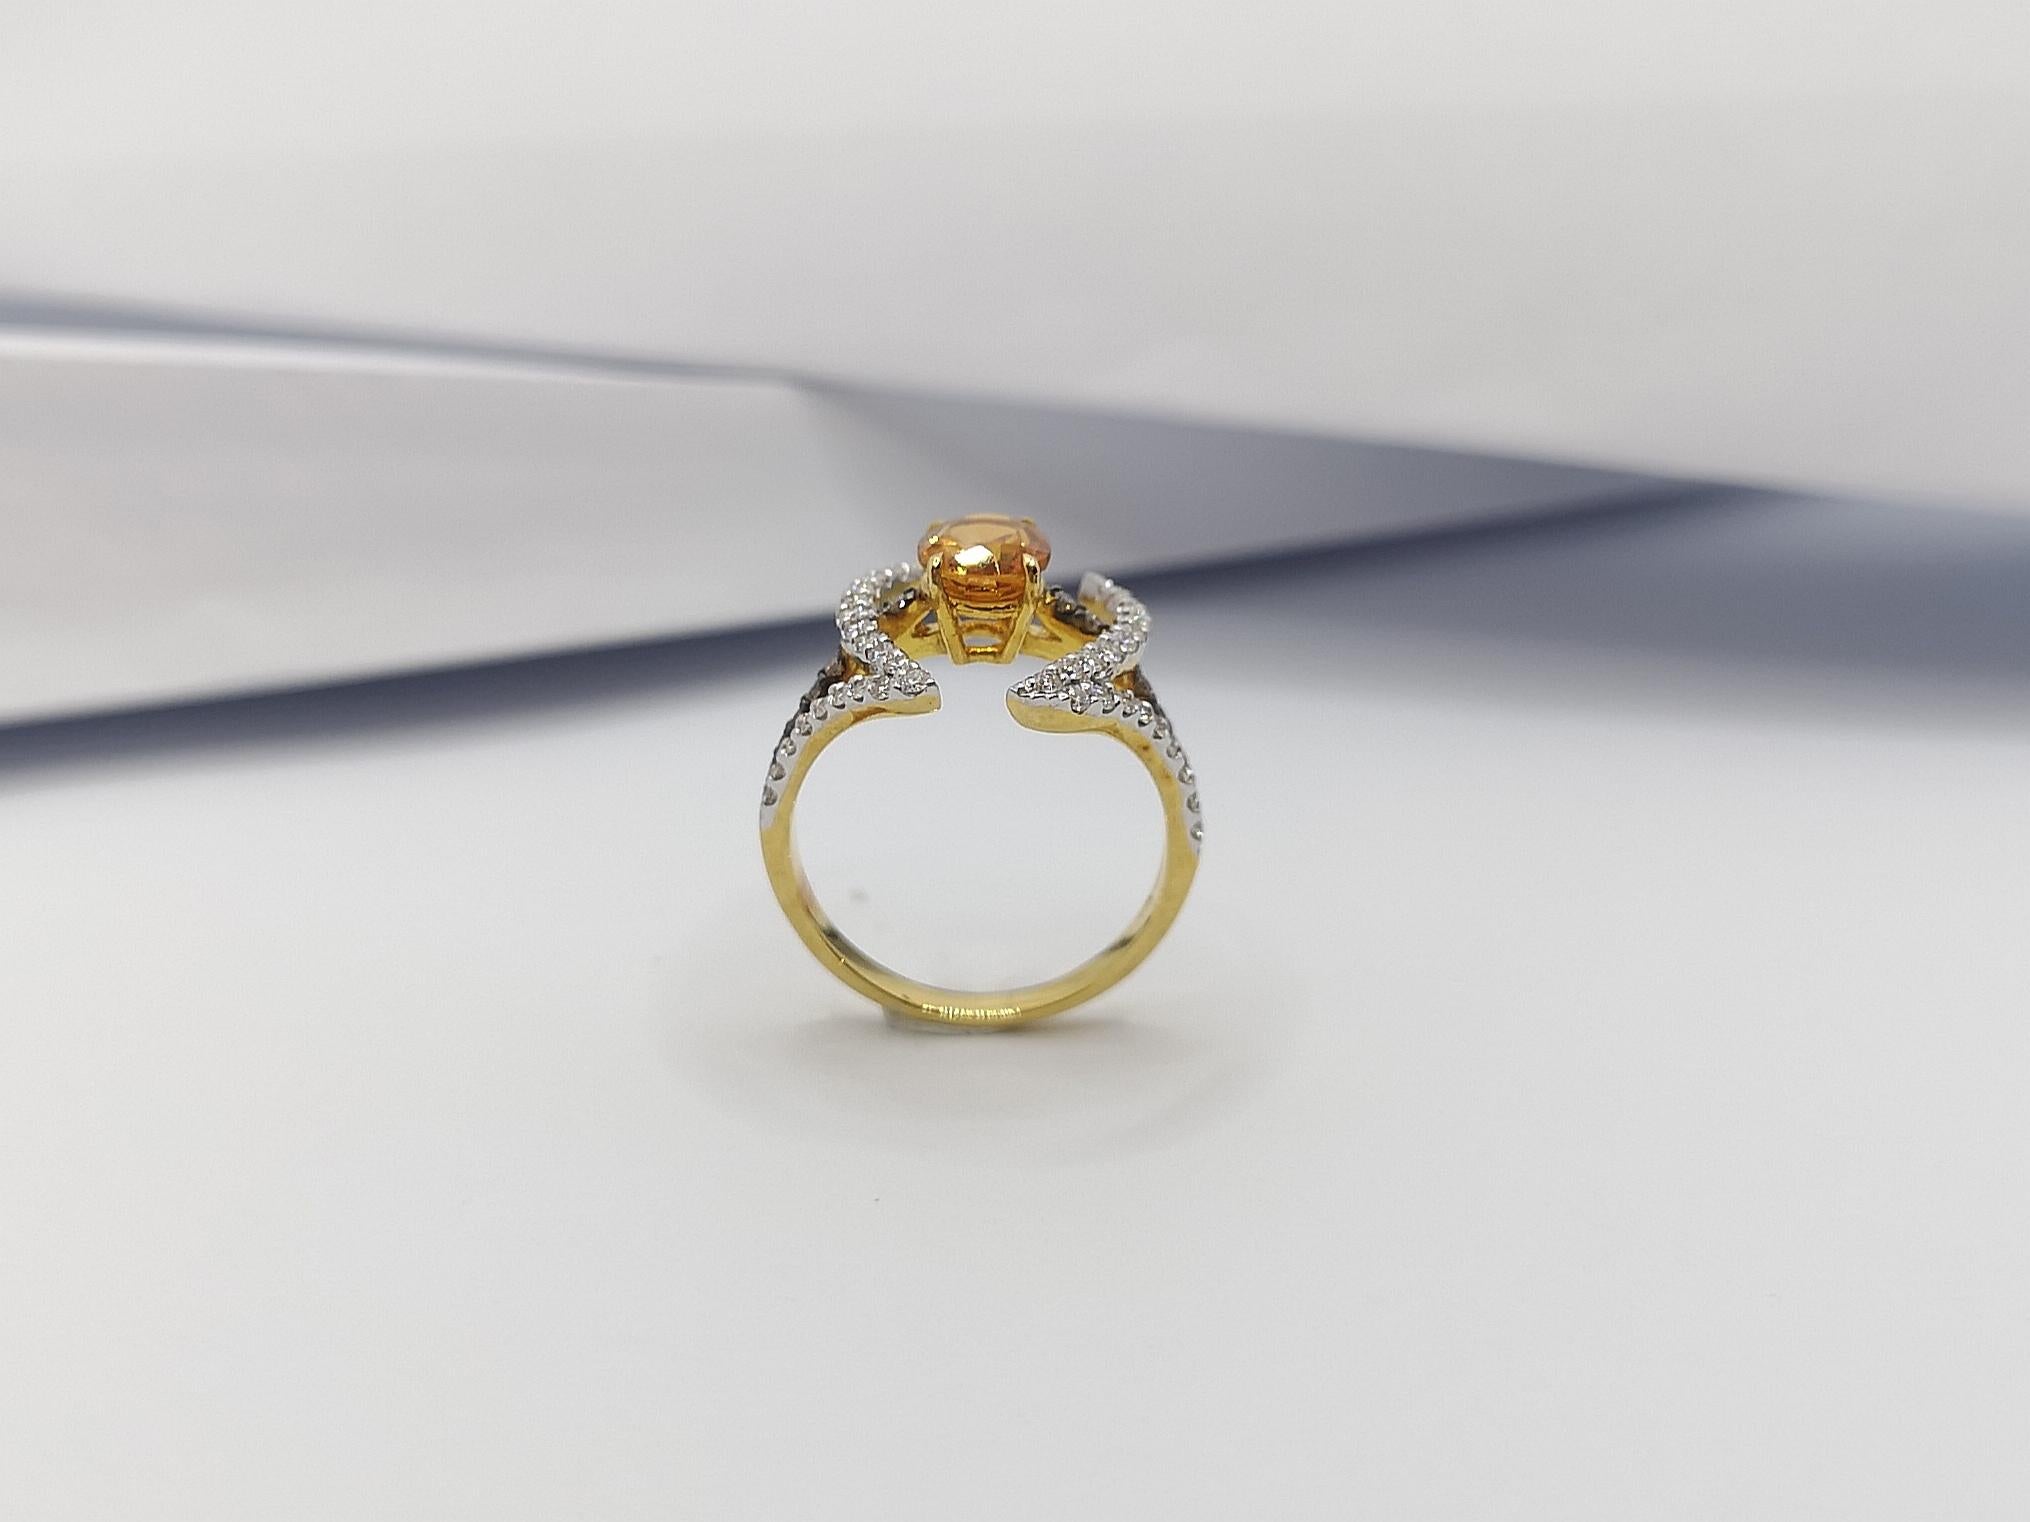 Citrine, Brown Diamond and Diamond Ring Set in 18k Gold by Kavant & Sharart 11